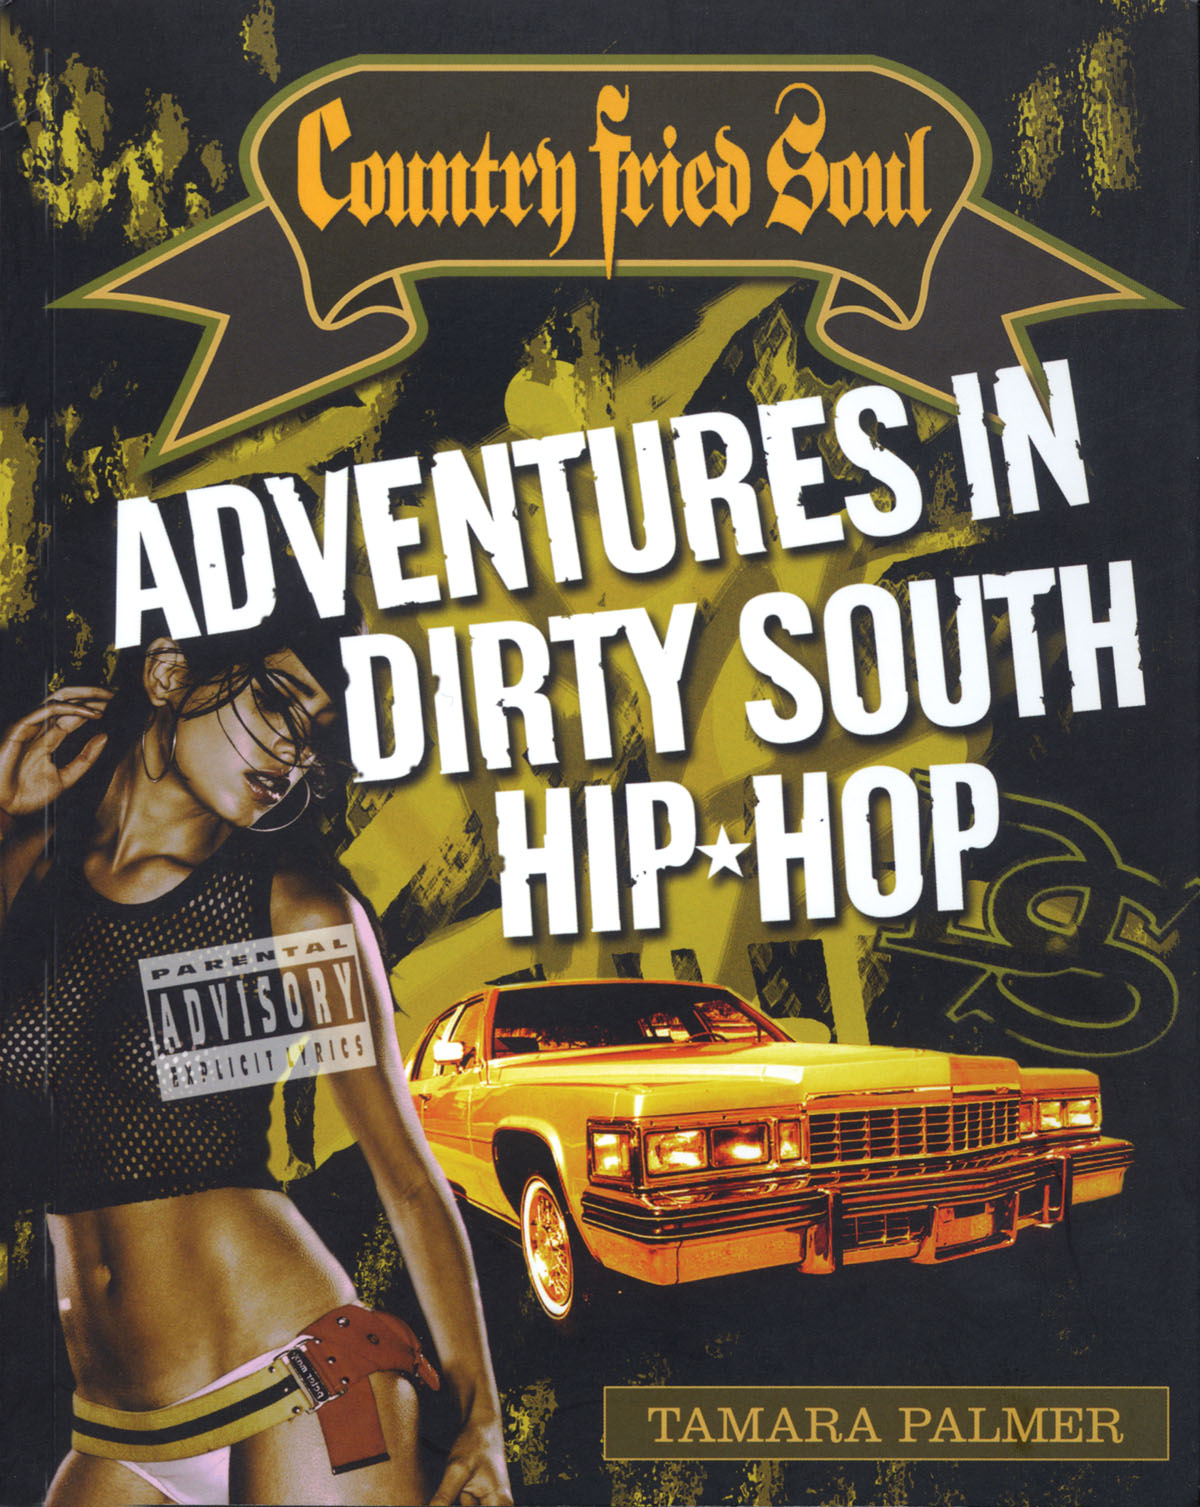 Country Fried Soul - Adv. In Dirty South Hip Hop: Reference Books